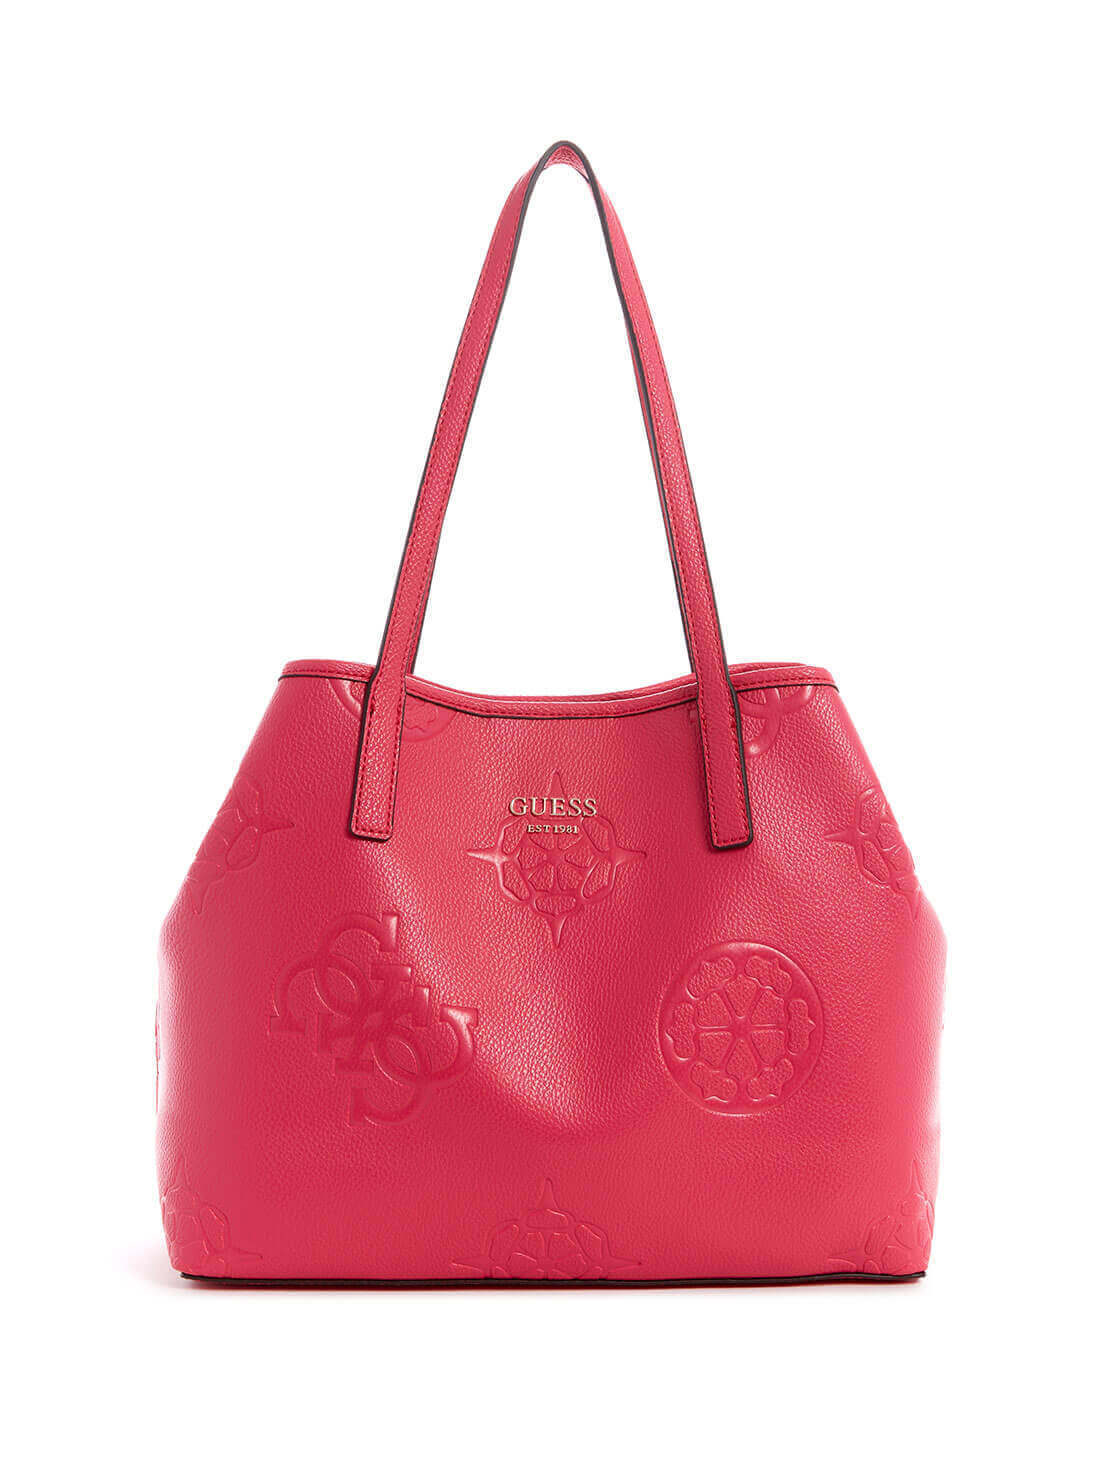 GUESS Women's Pink Vikky Tote Bag DP699523 Front View